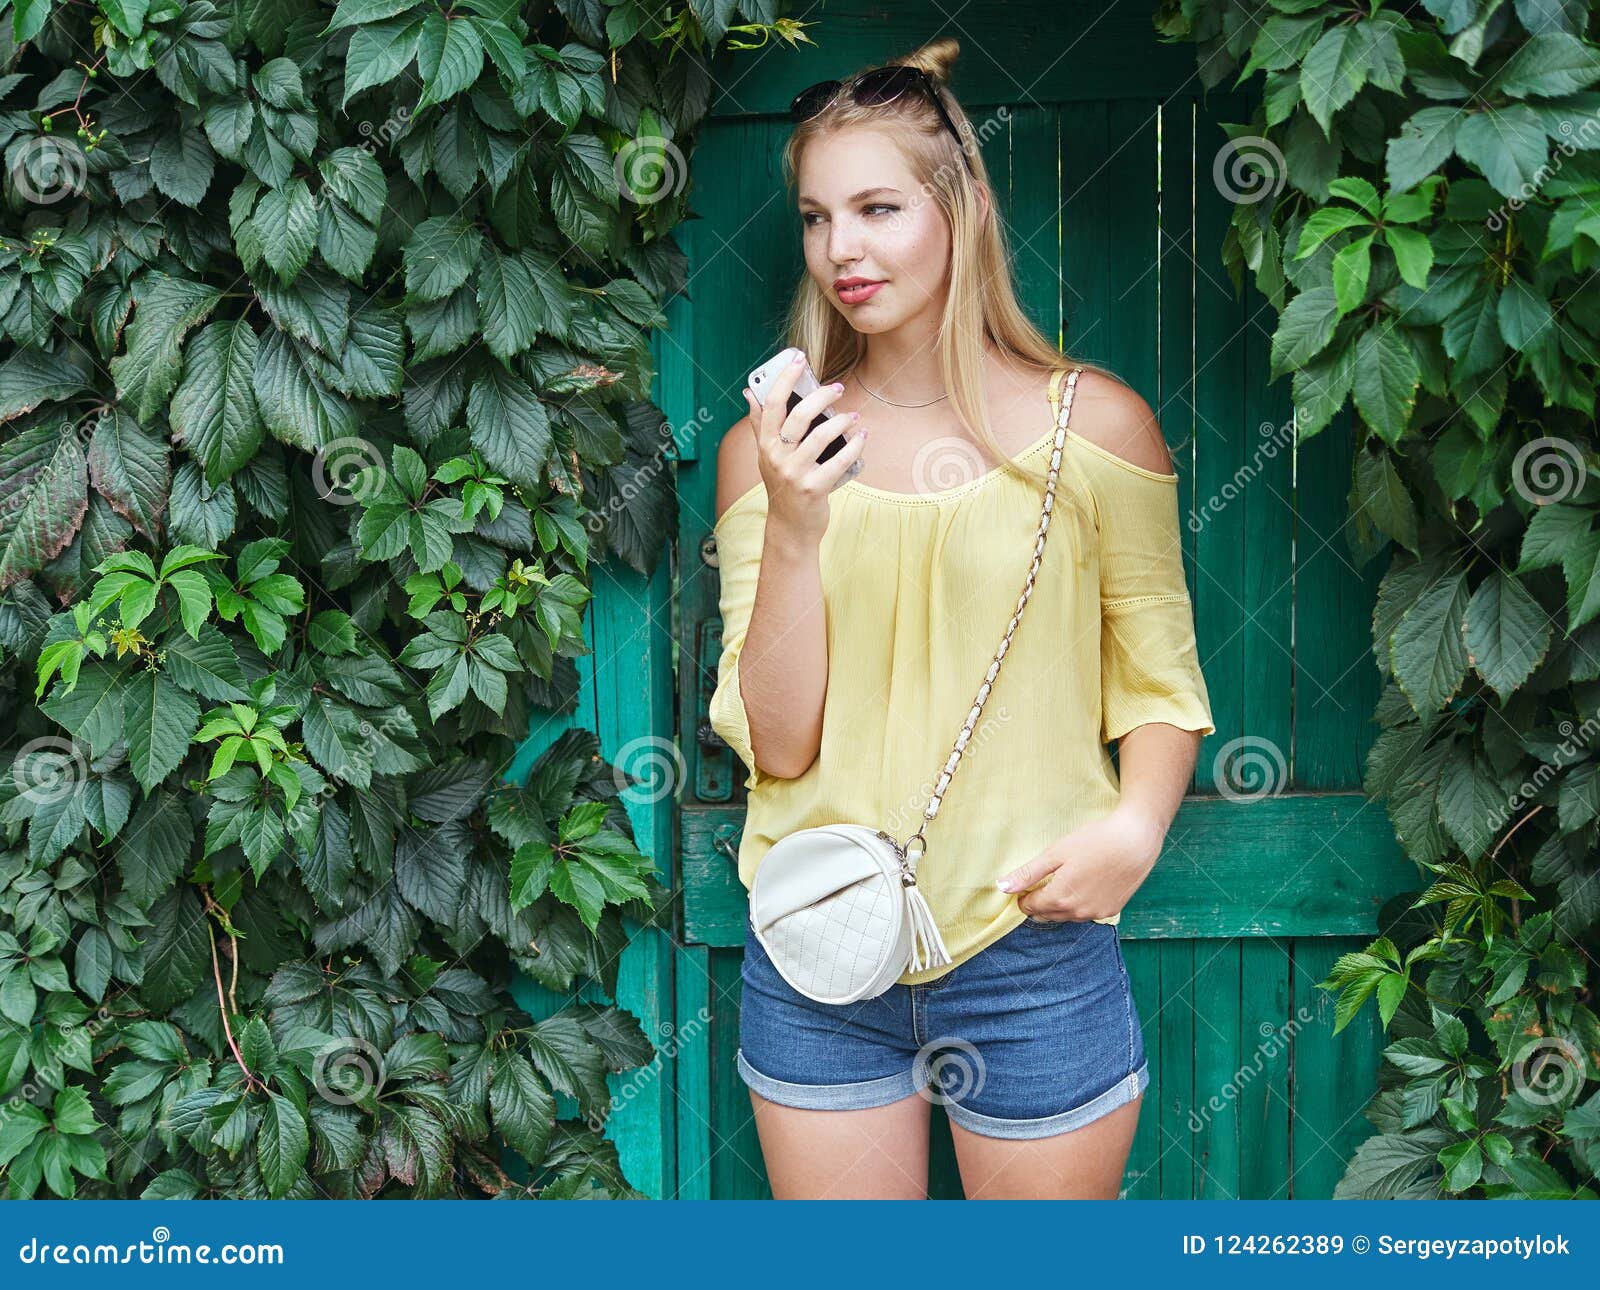 Outdoors Portrait Of Young Beautiful Blonde Woman With High Bun Hairstyle  Jeans Shorts Yellow Blouse Enjoying Journey Weekend Posi Stock Photo  124262389 - Megapixl